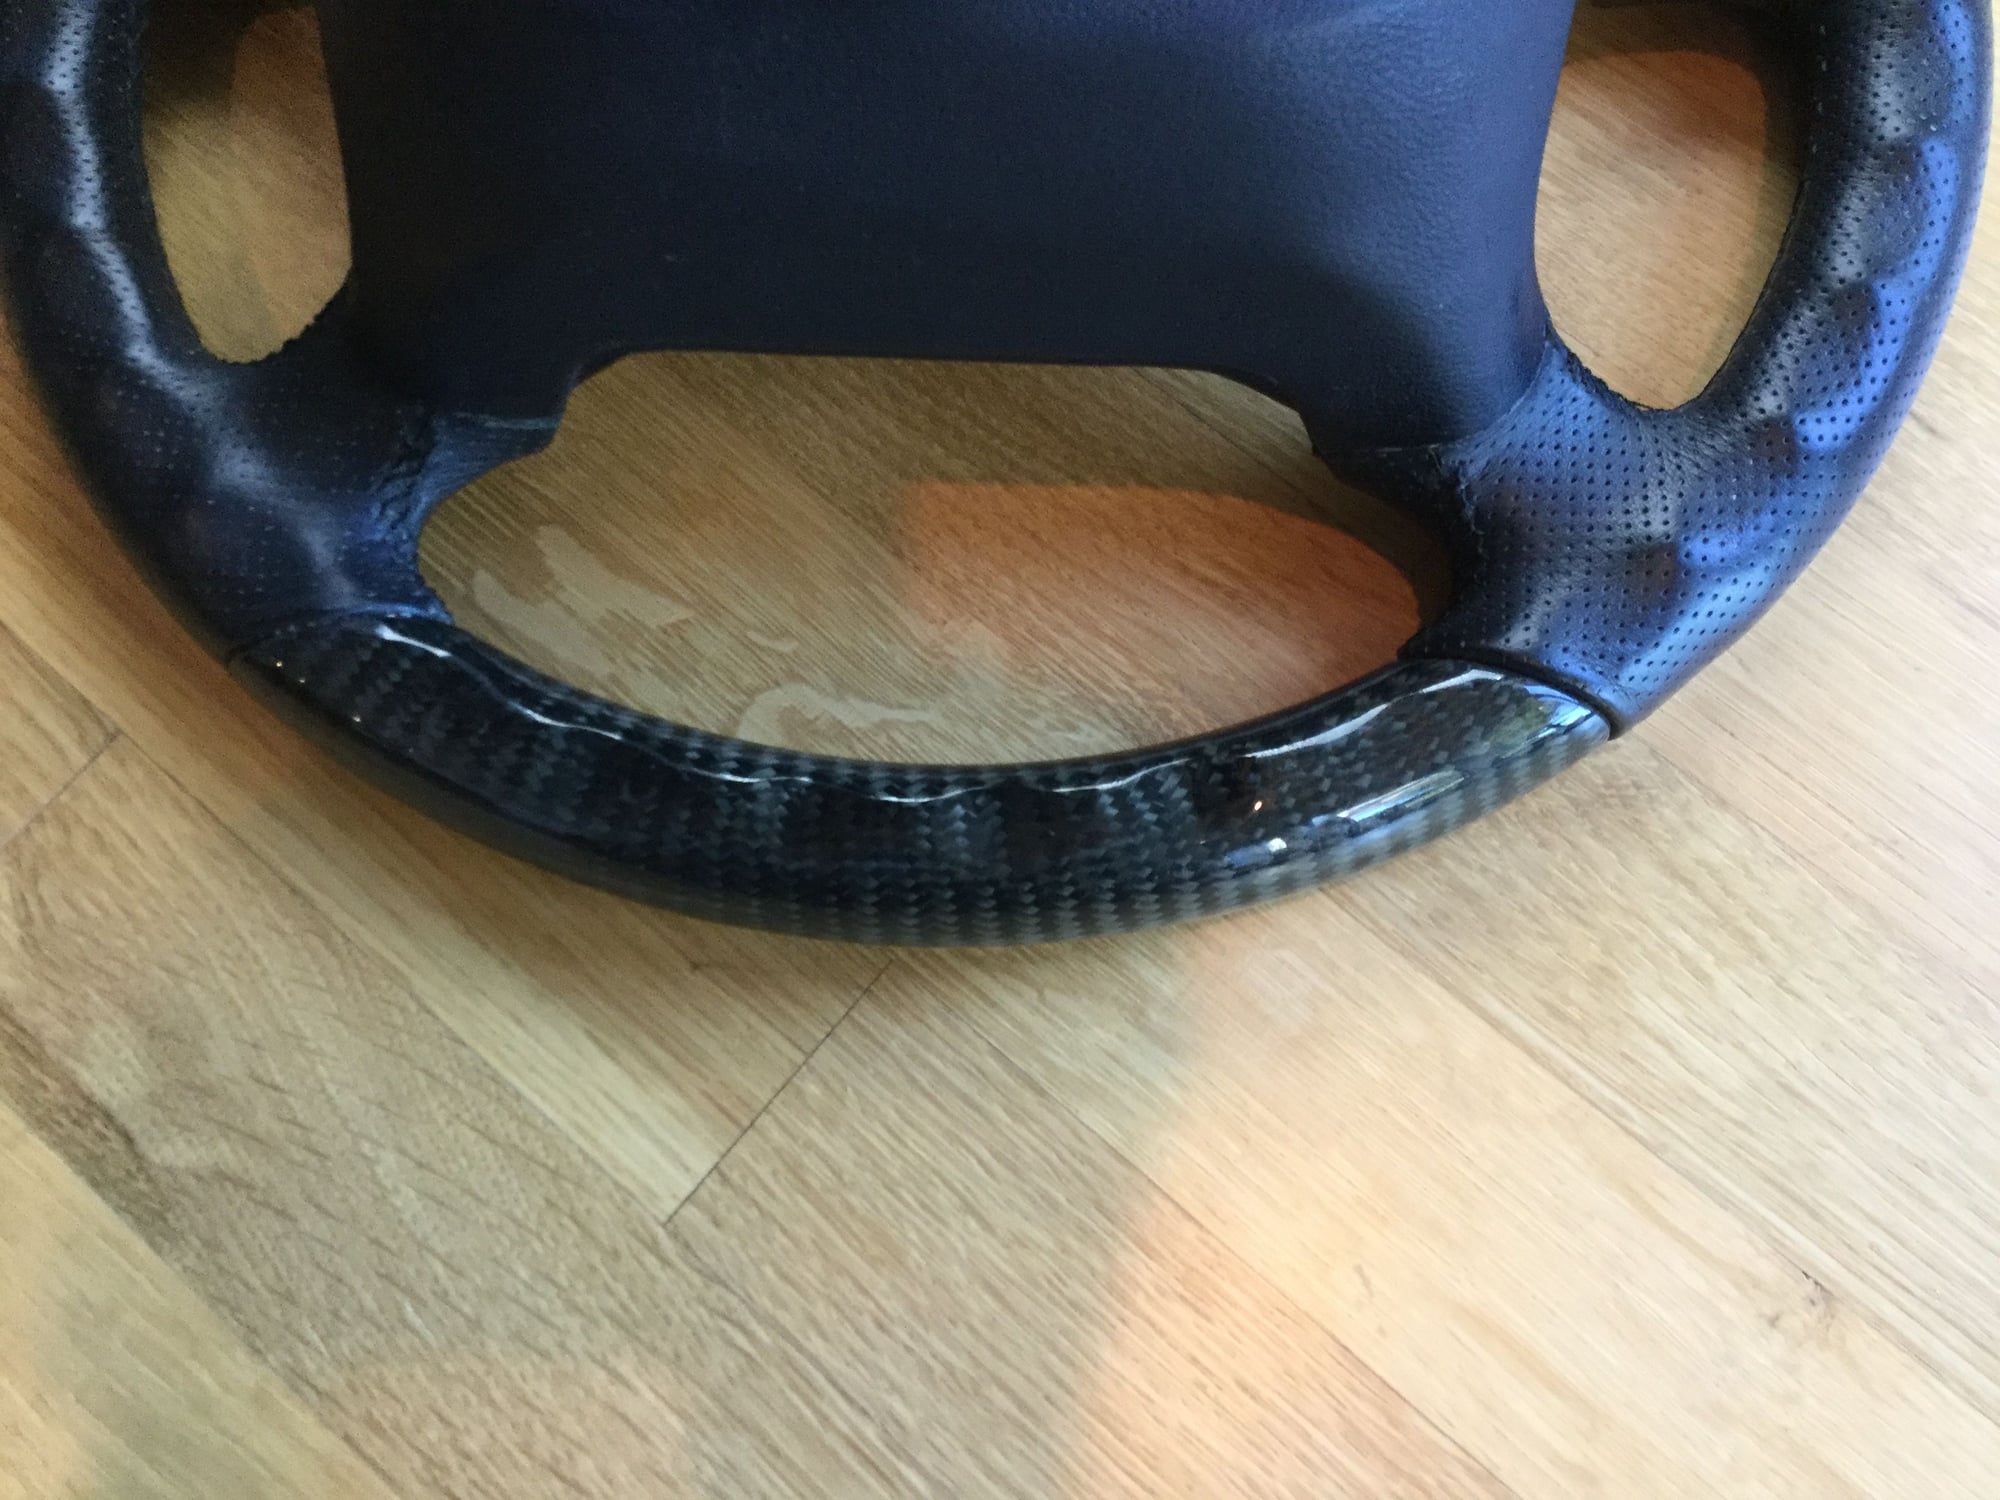 Accessories - EXCELLENT CONDITION CARBON FIBER & LEATHER 4 SPOKE STEERING WHEEL 993, 996, 986 - Used - All Years Porsche All Models - Piedmont, CA 94611, United States